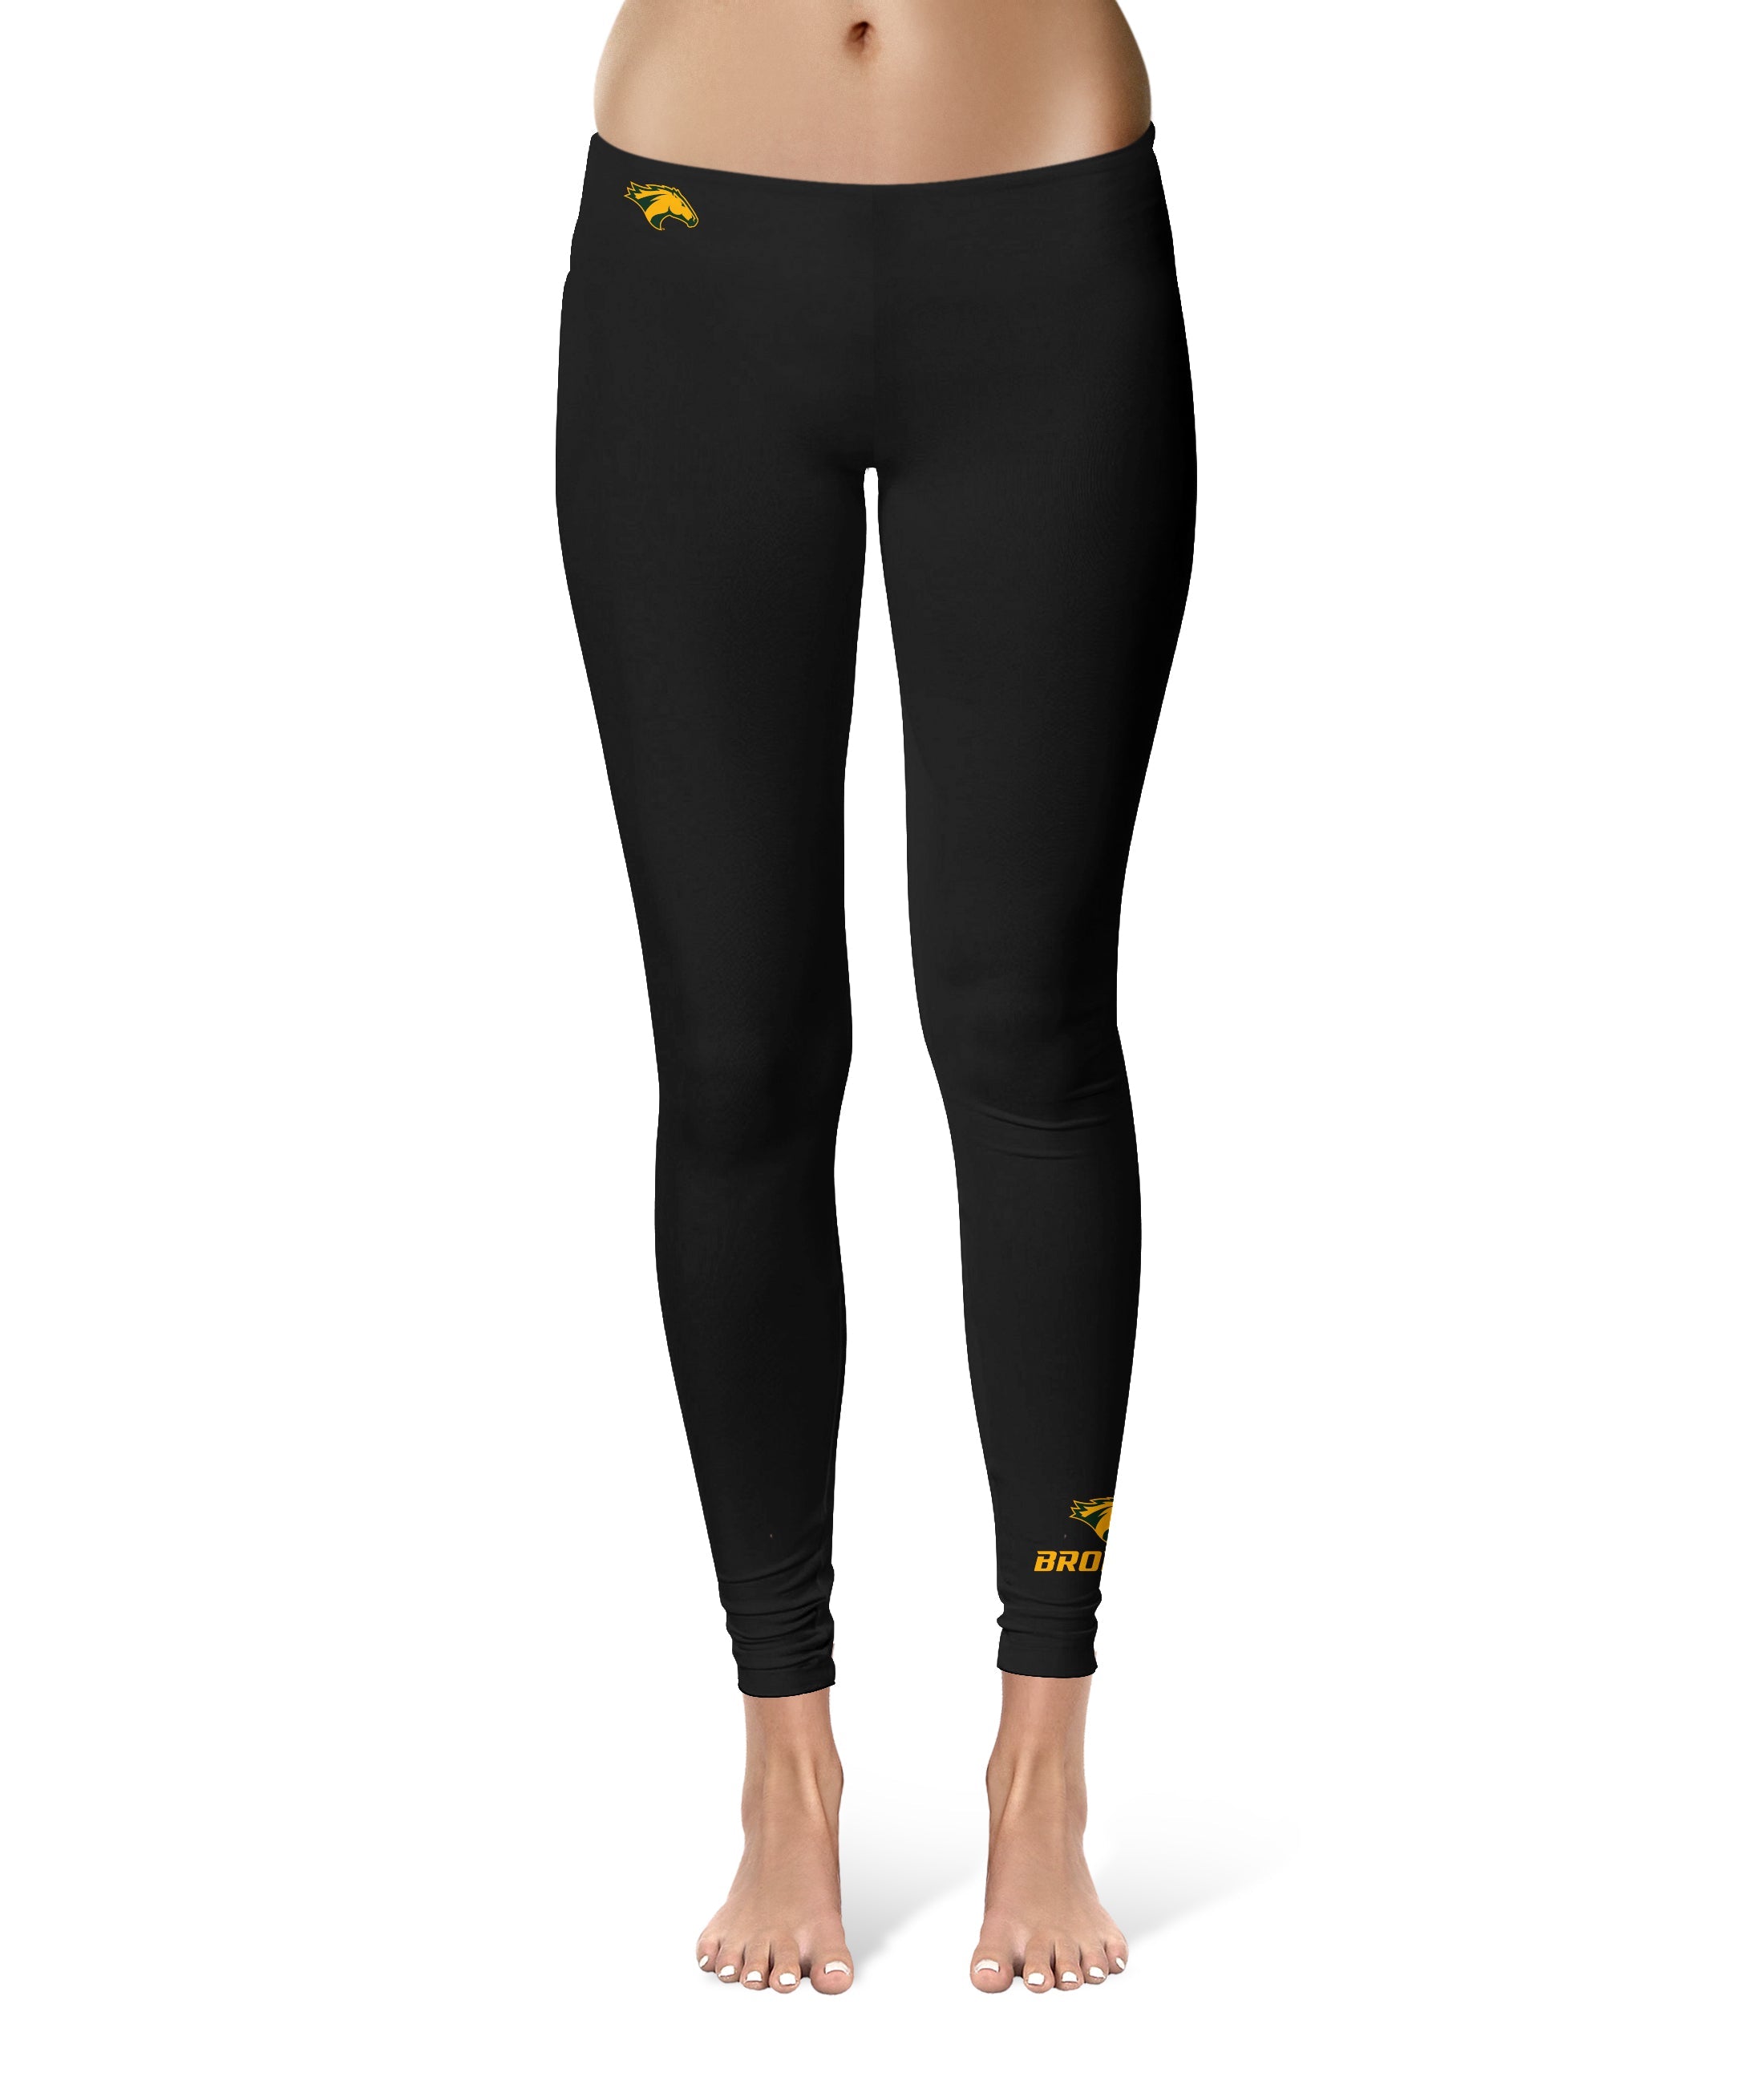 Cal Poly Pomona Broncos Game Day Logo at Ankle Black Yoga Leggings for  Women 2.5 Waist Tights